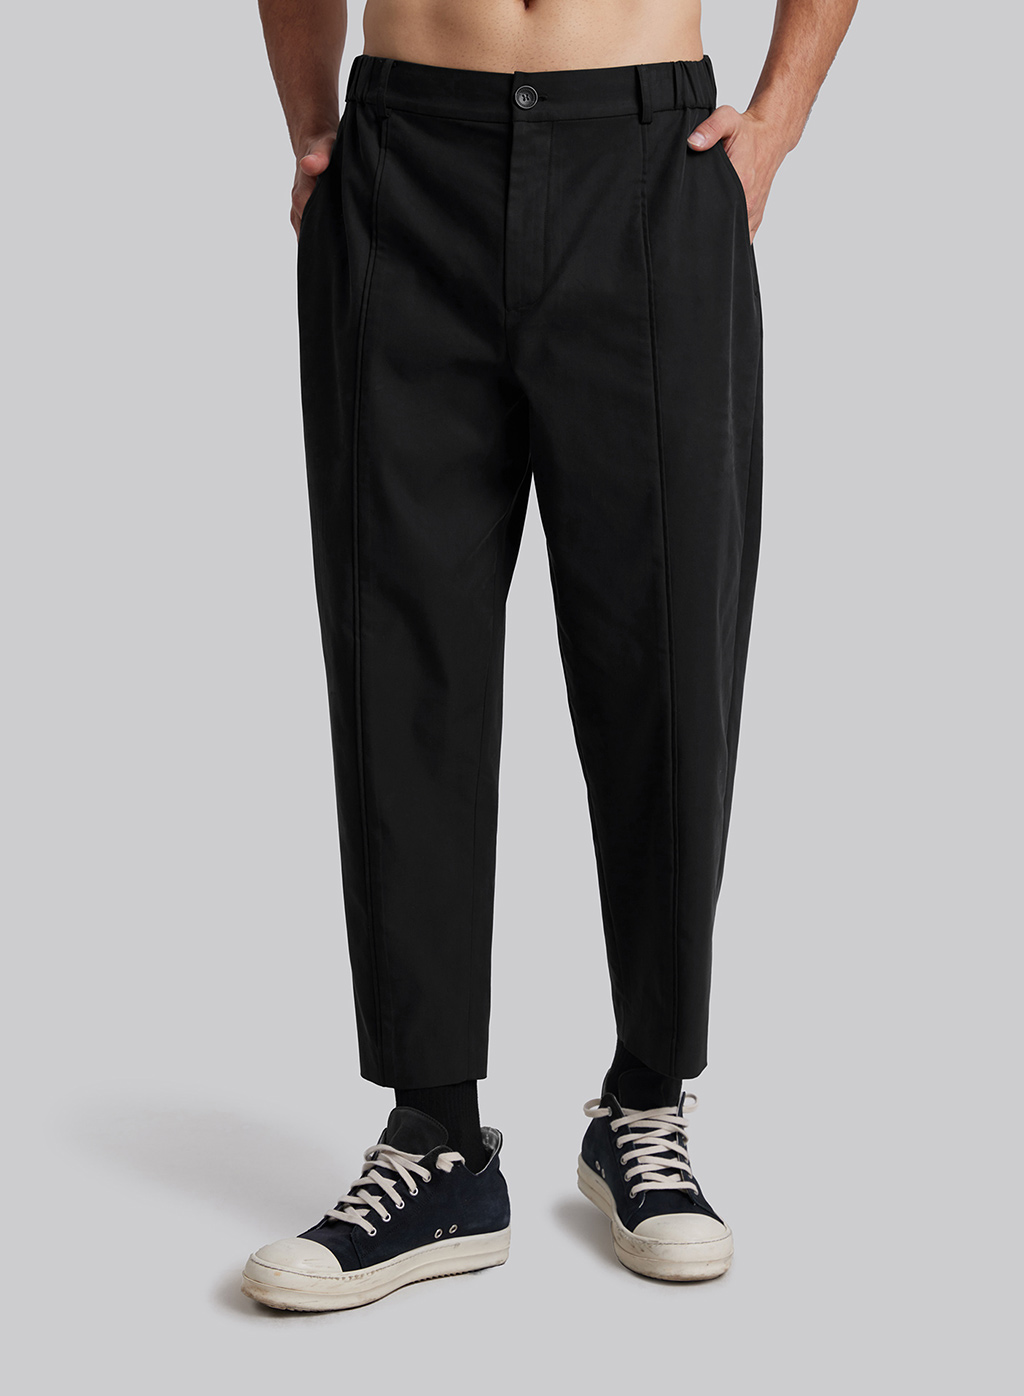 Shop Men's Luxury Clothing: 15% Off All Items - Nap Loungewear